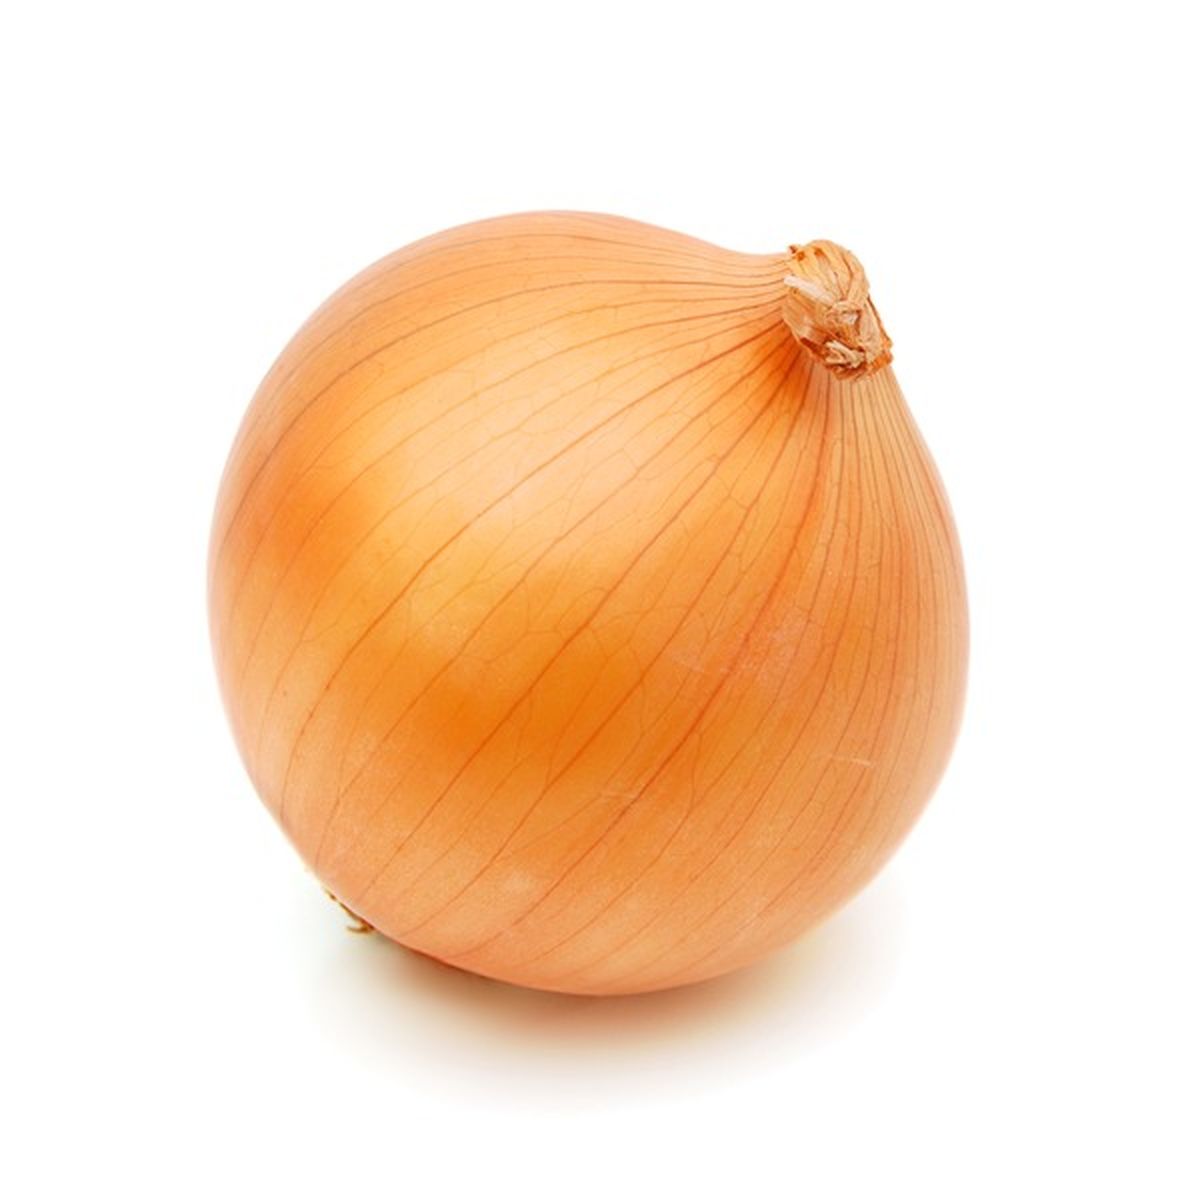 yellow onion sliced and roasted